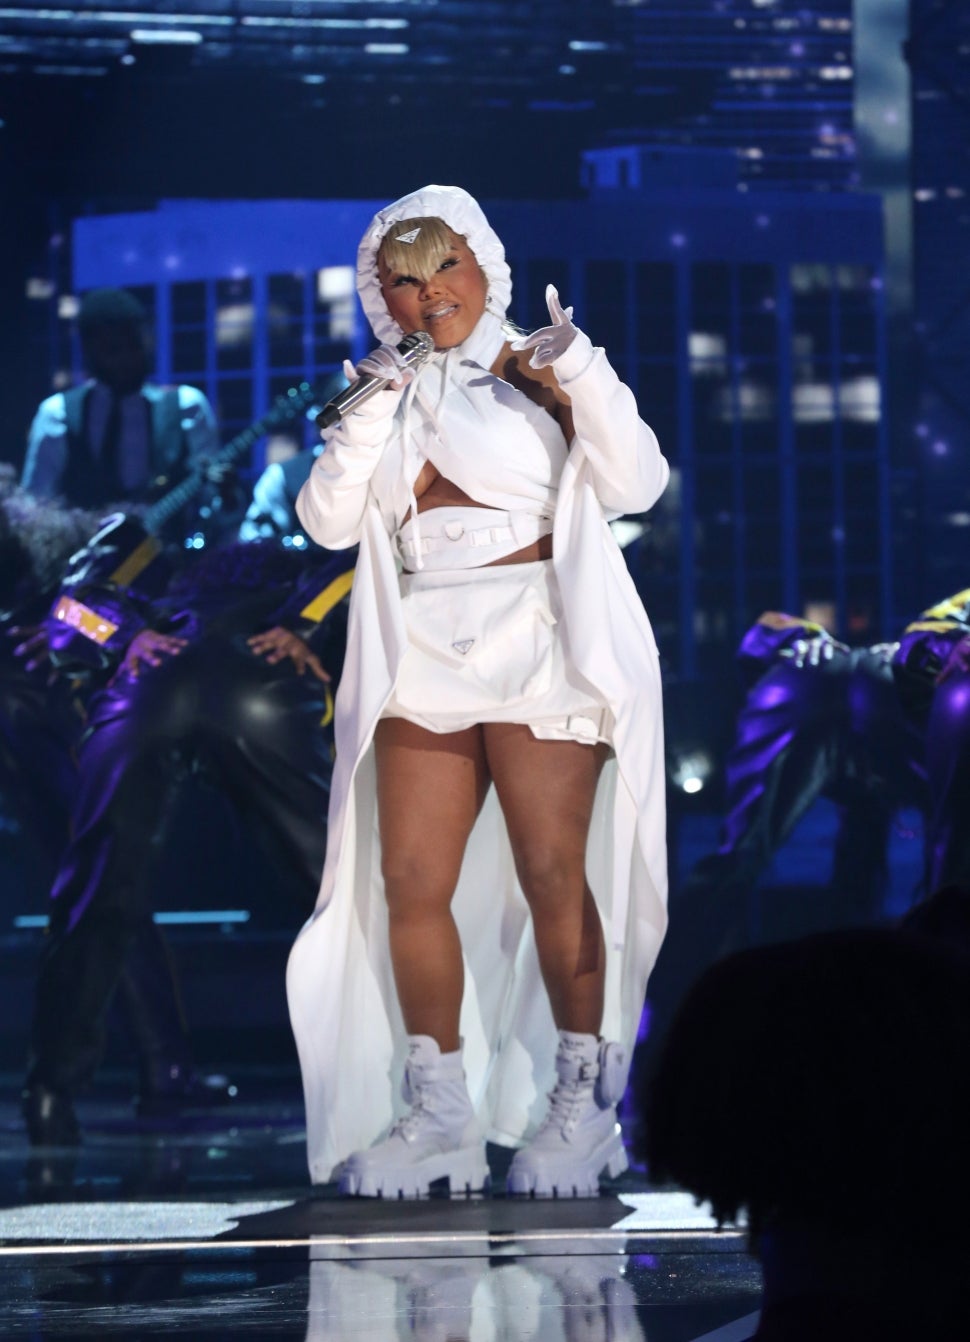 Lil' Kim performs onstage at the BET Awards 2021 at Microsoft Theater on June 27, 2021 in Los Angeles, California.